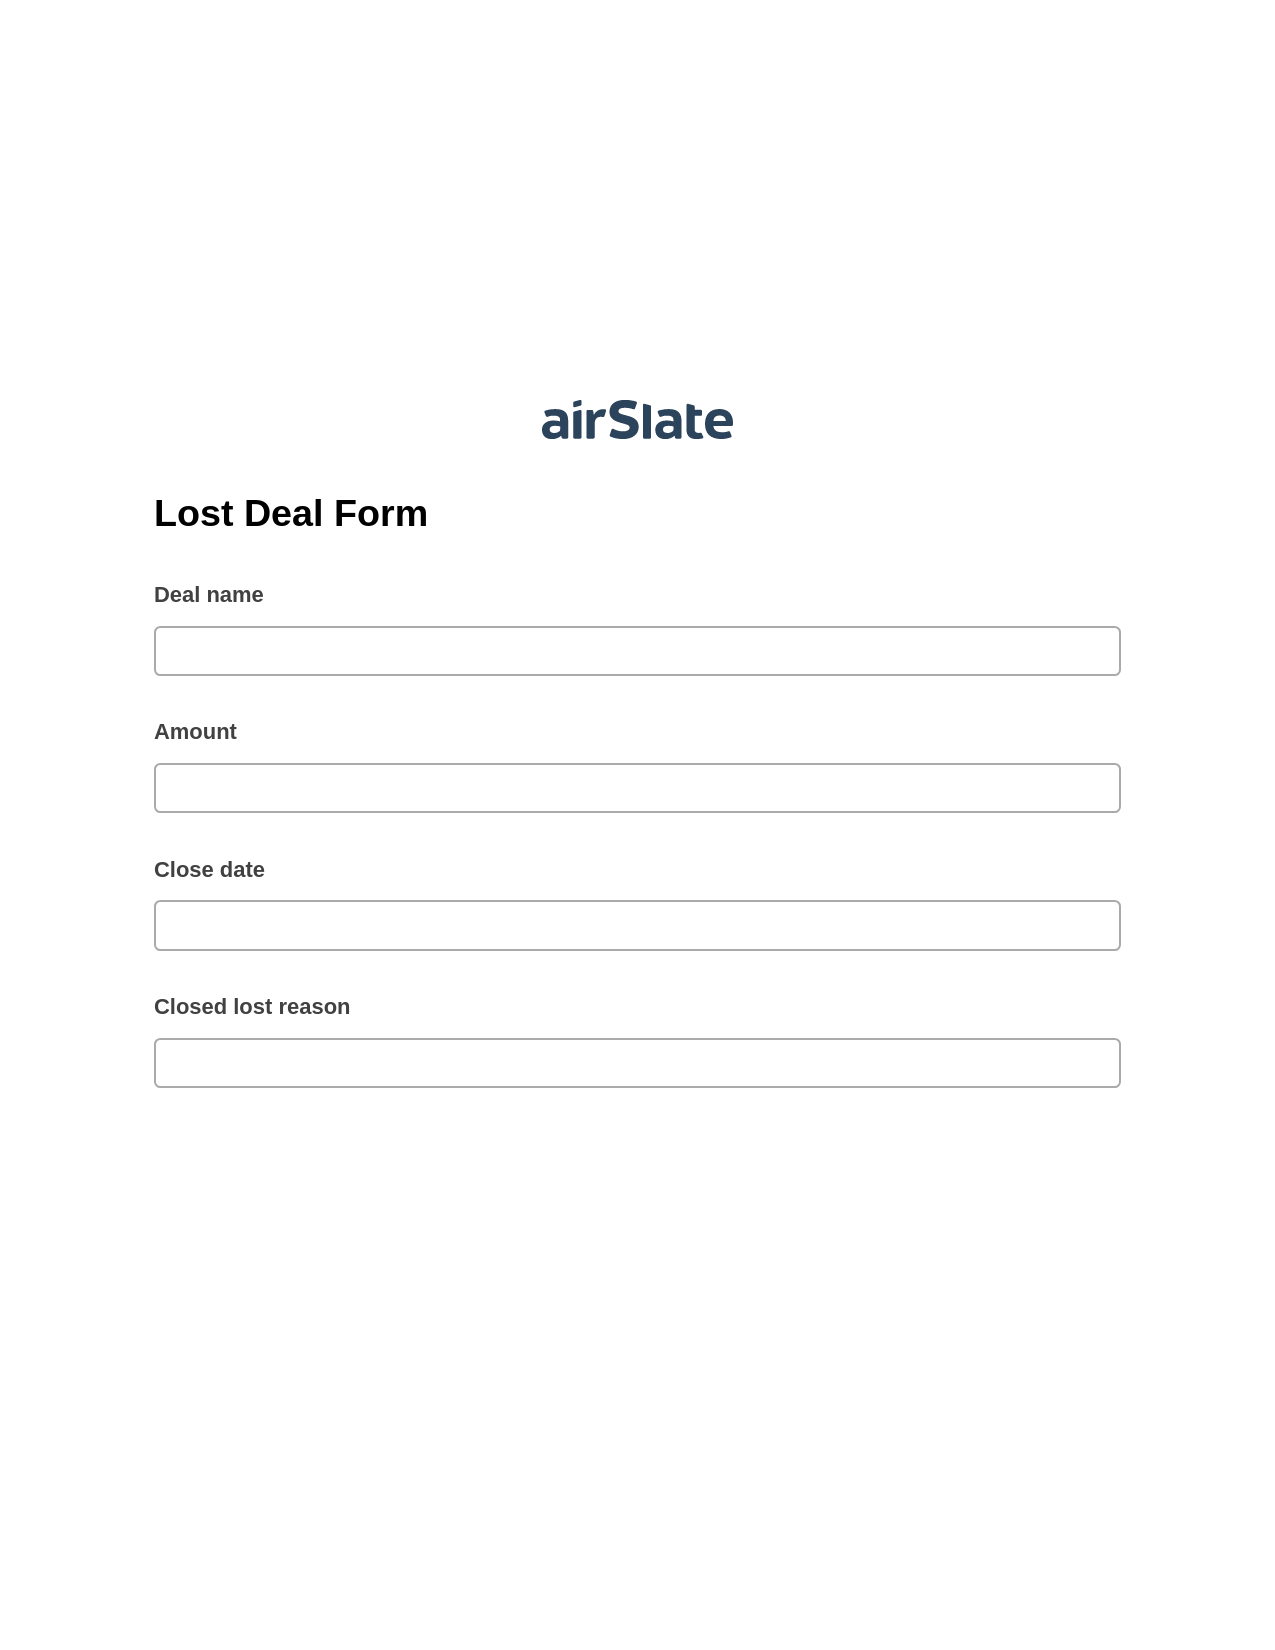 Lost Deal Form Pre-fill from Salesforce Records with SOQL Bot, Update MS Dynamics 365 Record Bot, Archive to Google Drive Bot